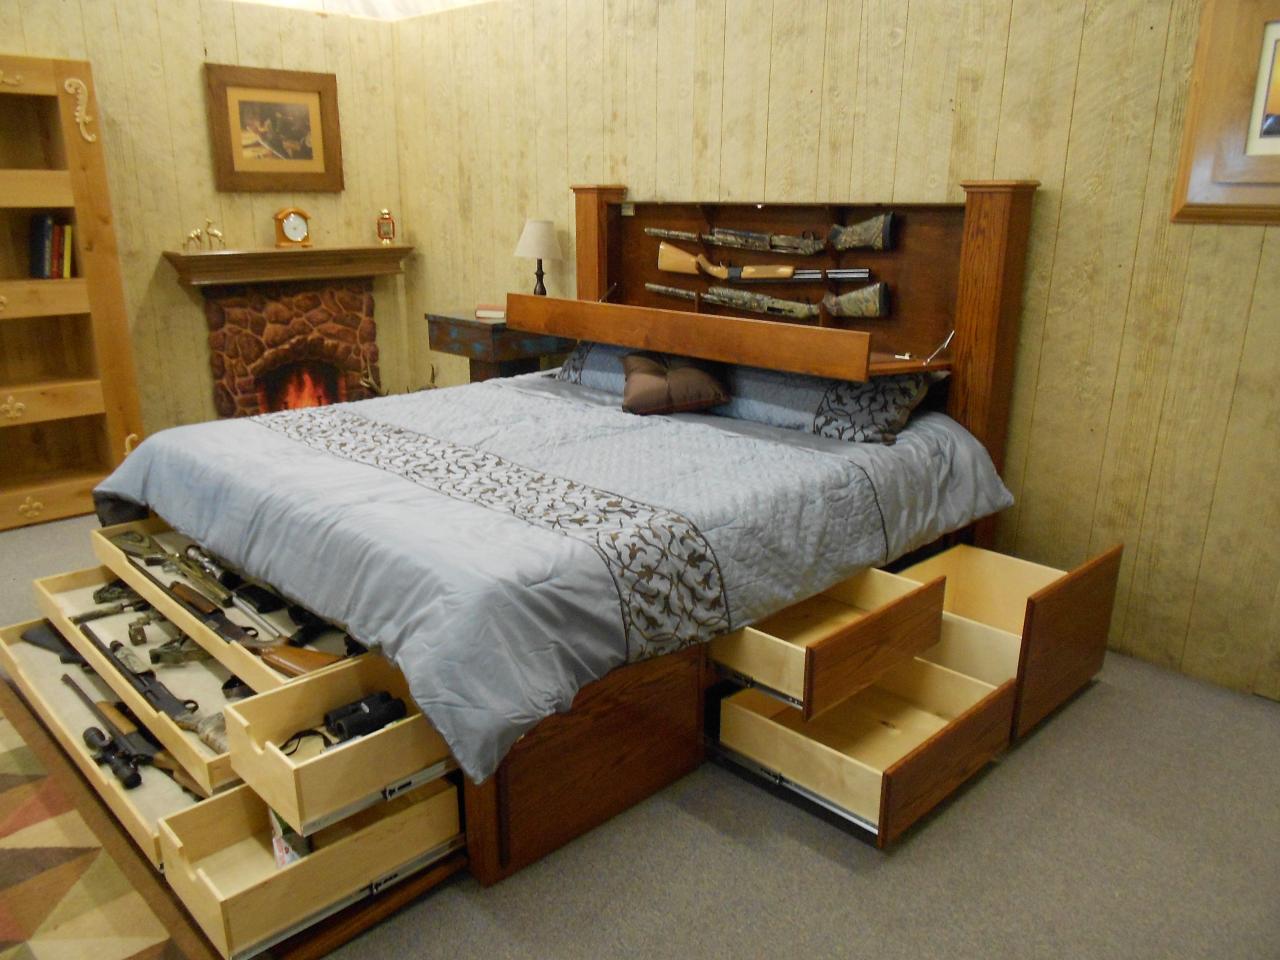 11 Sample Diy Storage Beds For Small Space Home decorating Ideas